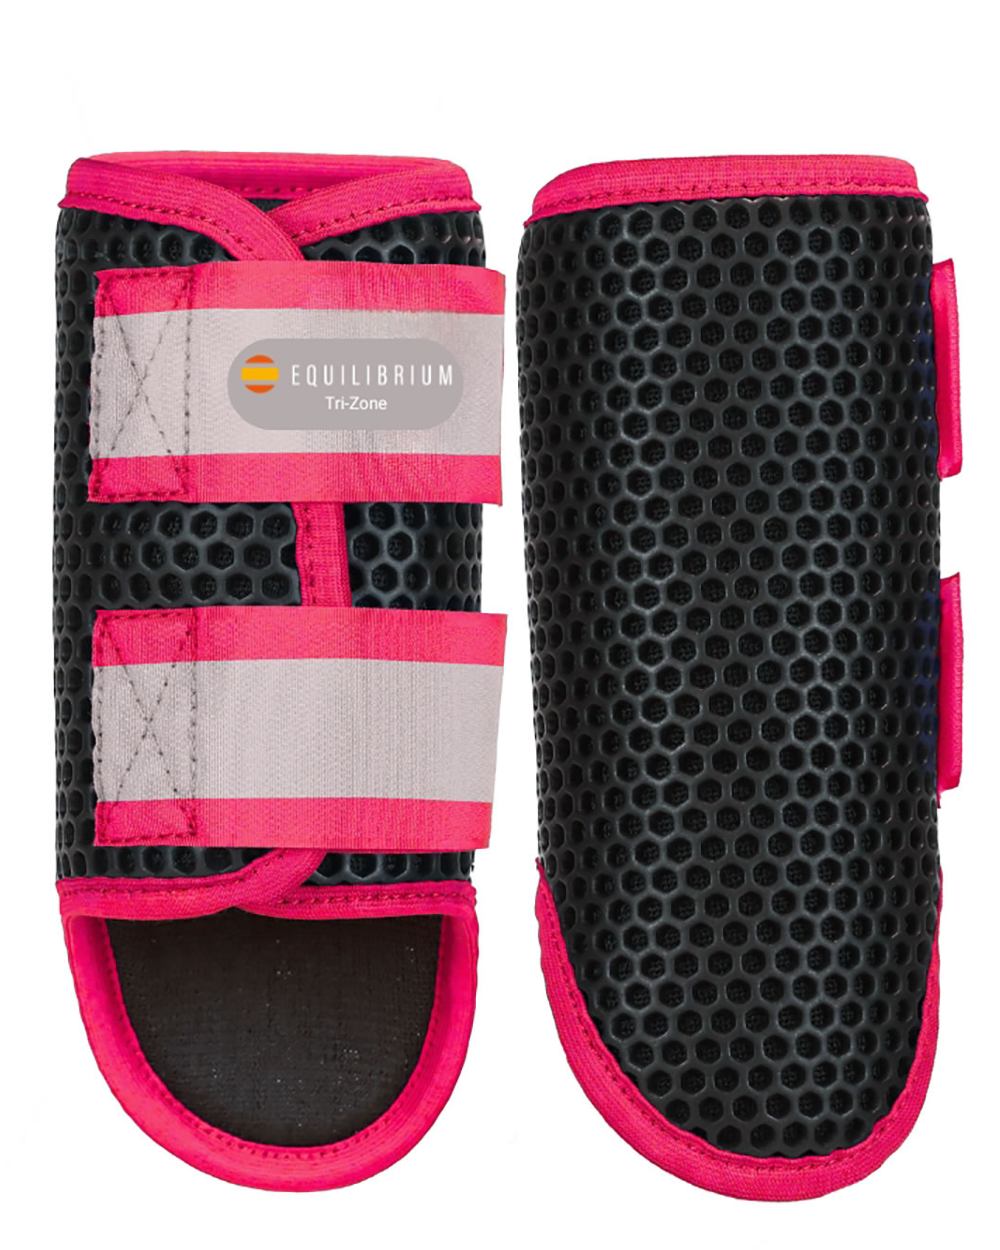 Black Fluorescent Pink coloured Equilibrium Tri-Zone Brushing Boots on white background 